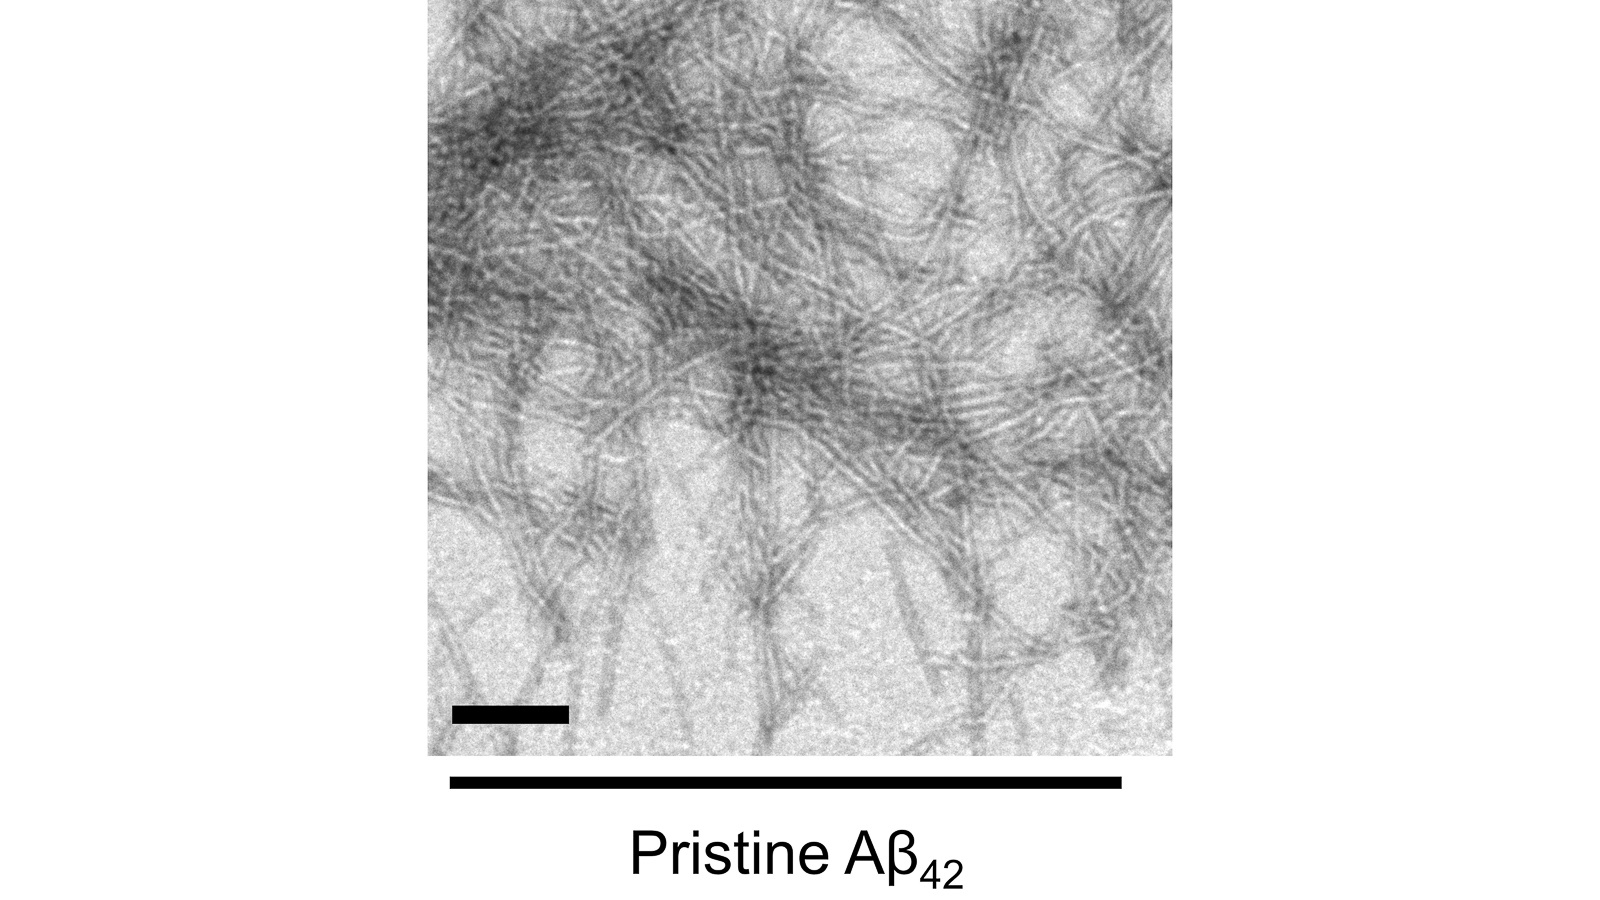 Transmission Electron Microscopy (TEM) images of Aβ peptide samples in the absence of the Aβ nanodevices (scale bar: 200 nm). The grains in the image are the peptides that, when left together, are prone to self-aggregation. (Image by Argonne’s Center for Nanoscale Materials.)